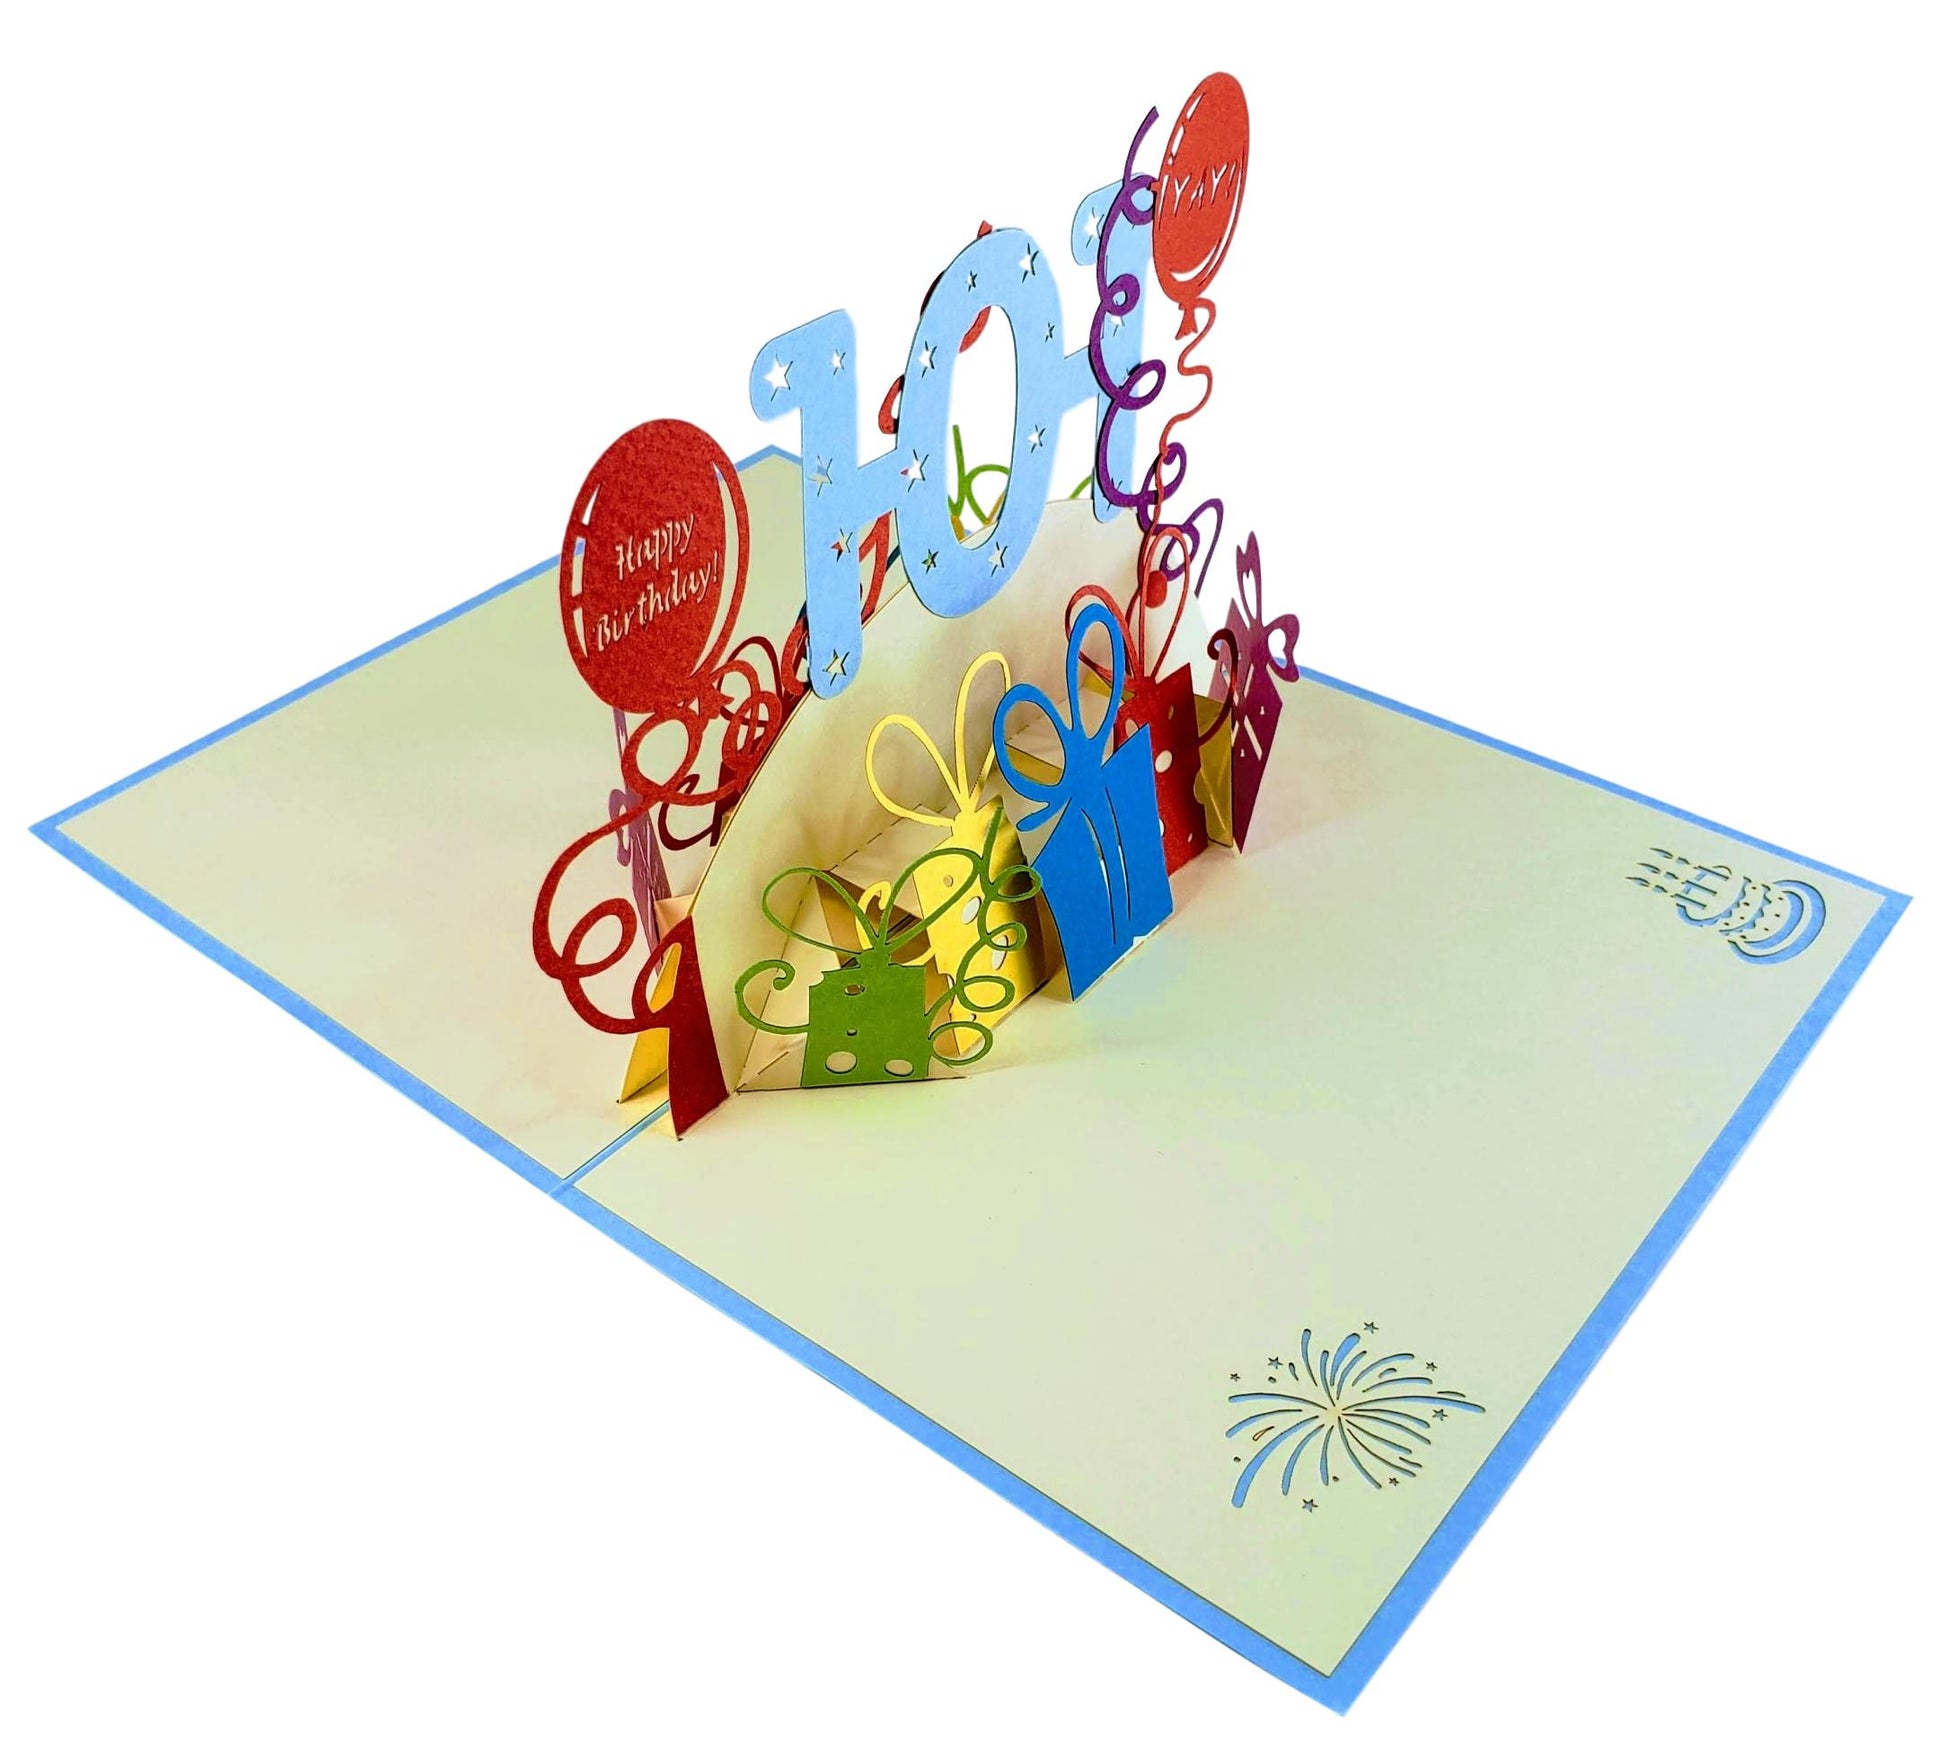 Happy 101st Birthday With Lots of Presents 3D Pop Up Greeting Card - Age - Birthday - iGifts And Cards